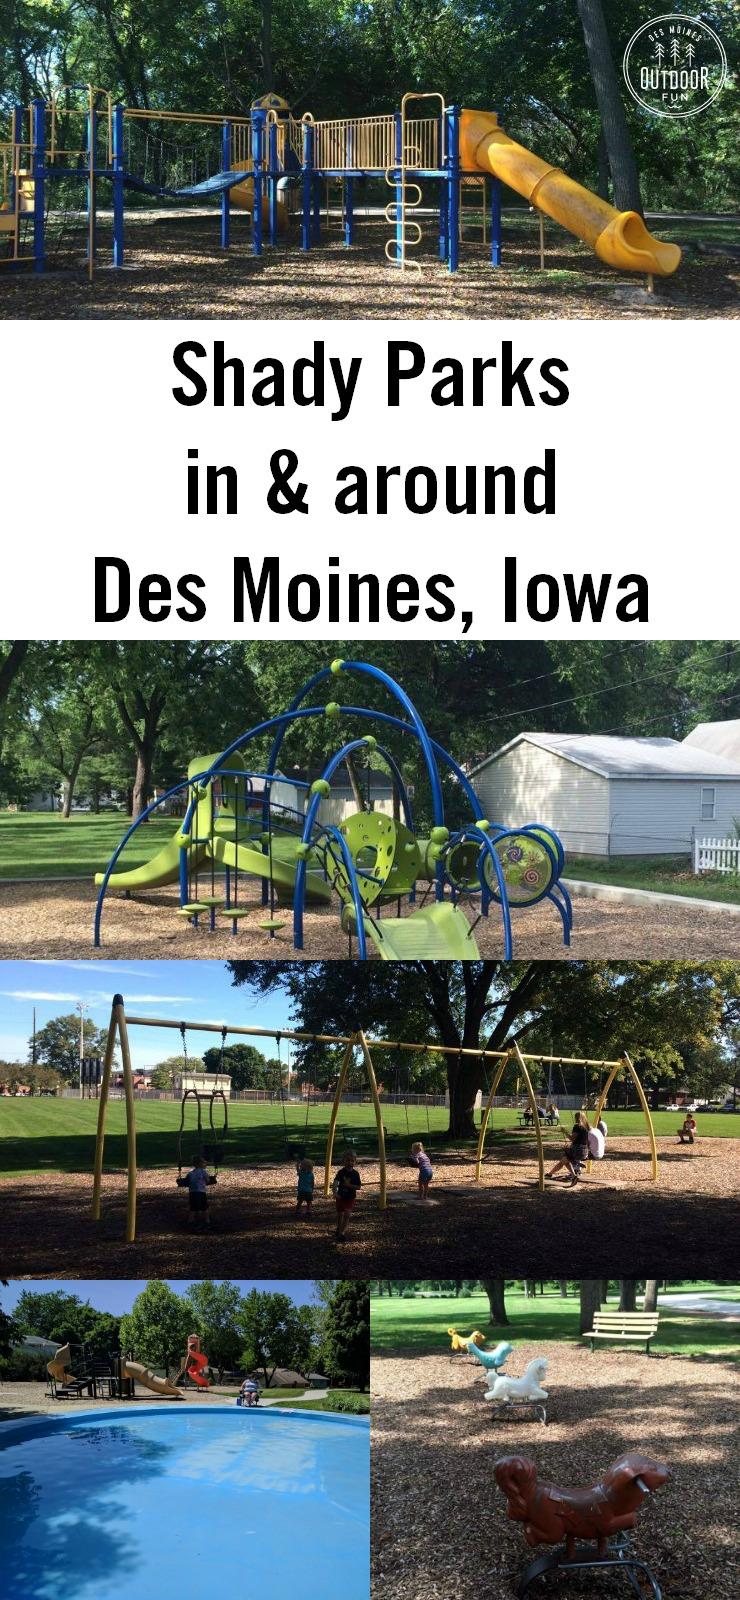 Check out a list of the playgrounds with shade in Des Moines, Iowa and surriounding suburbs.